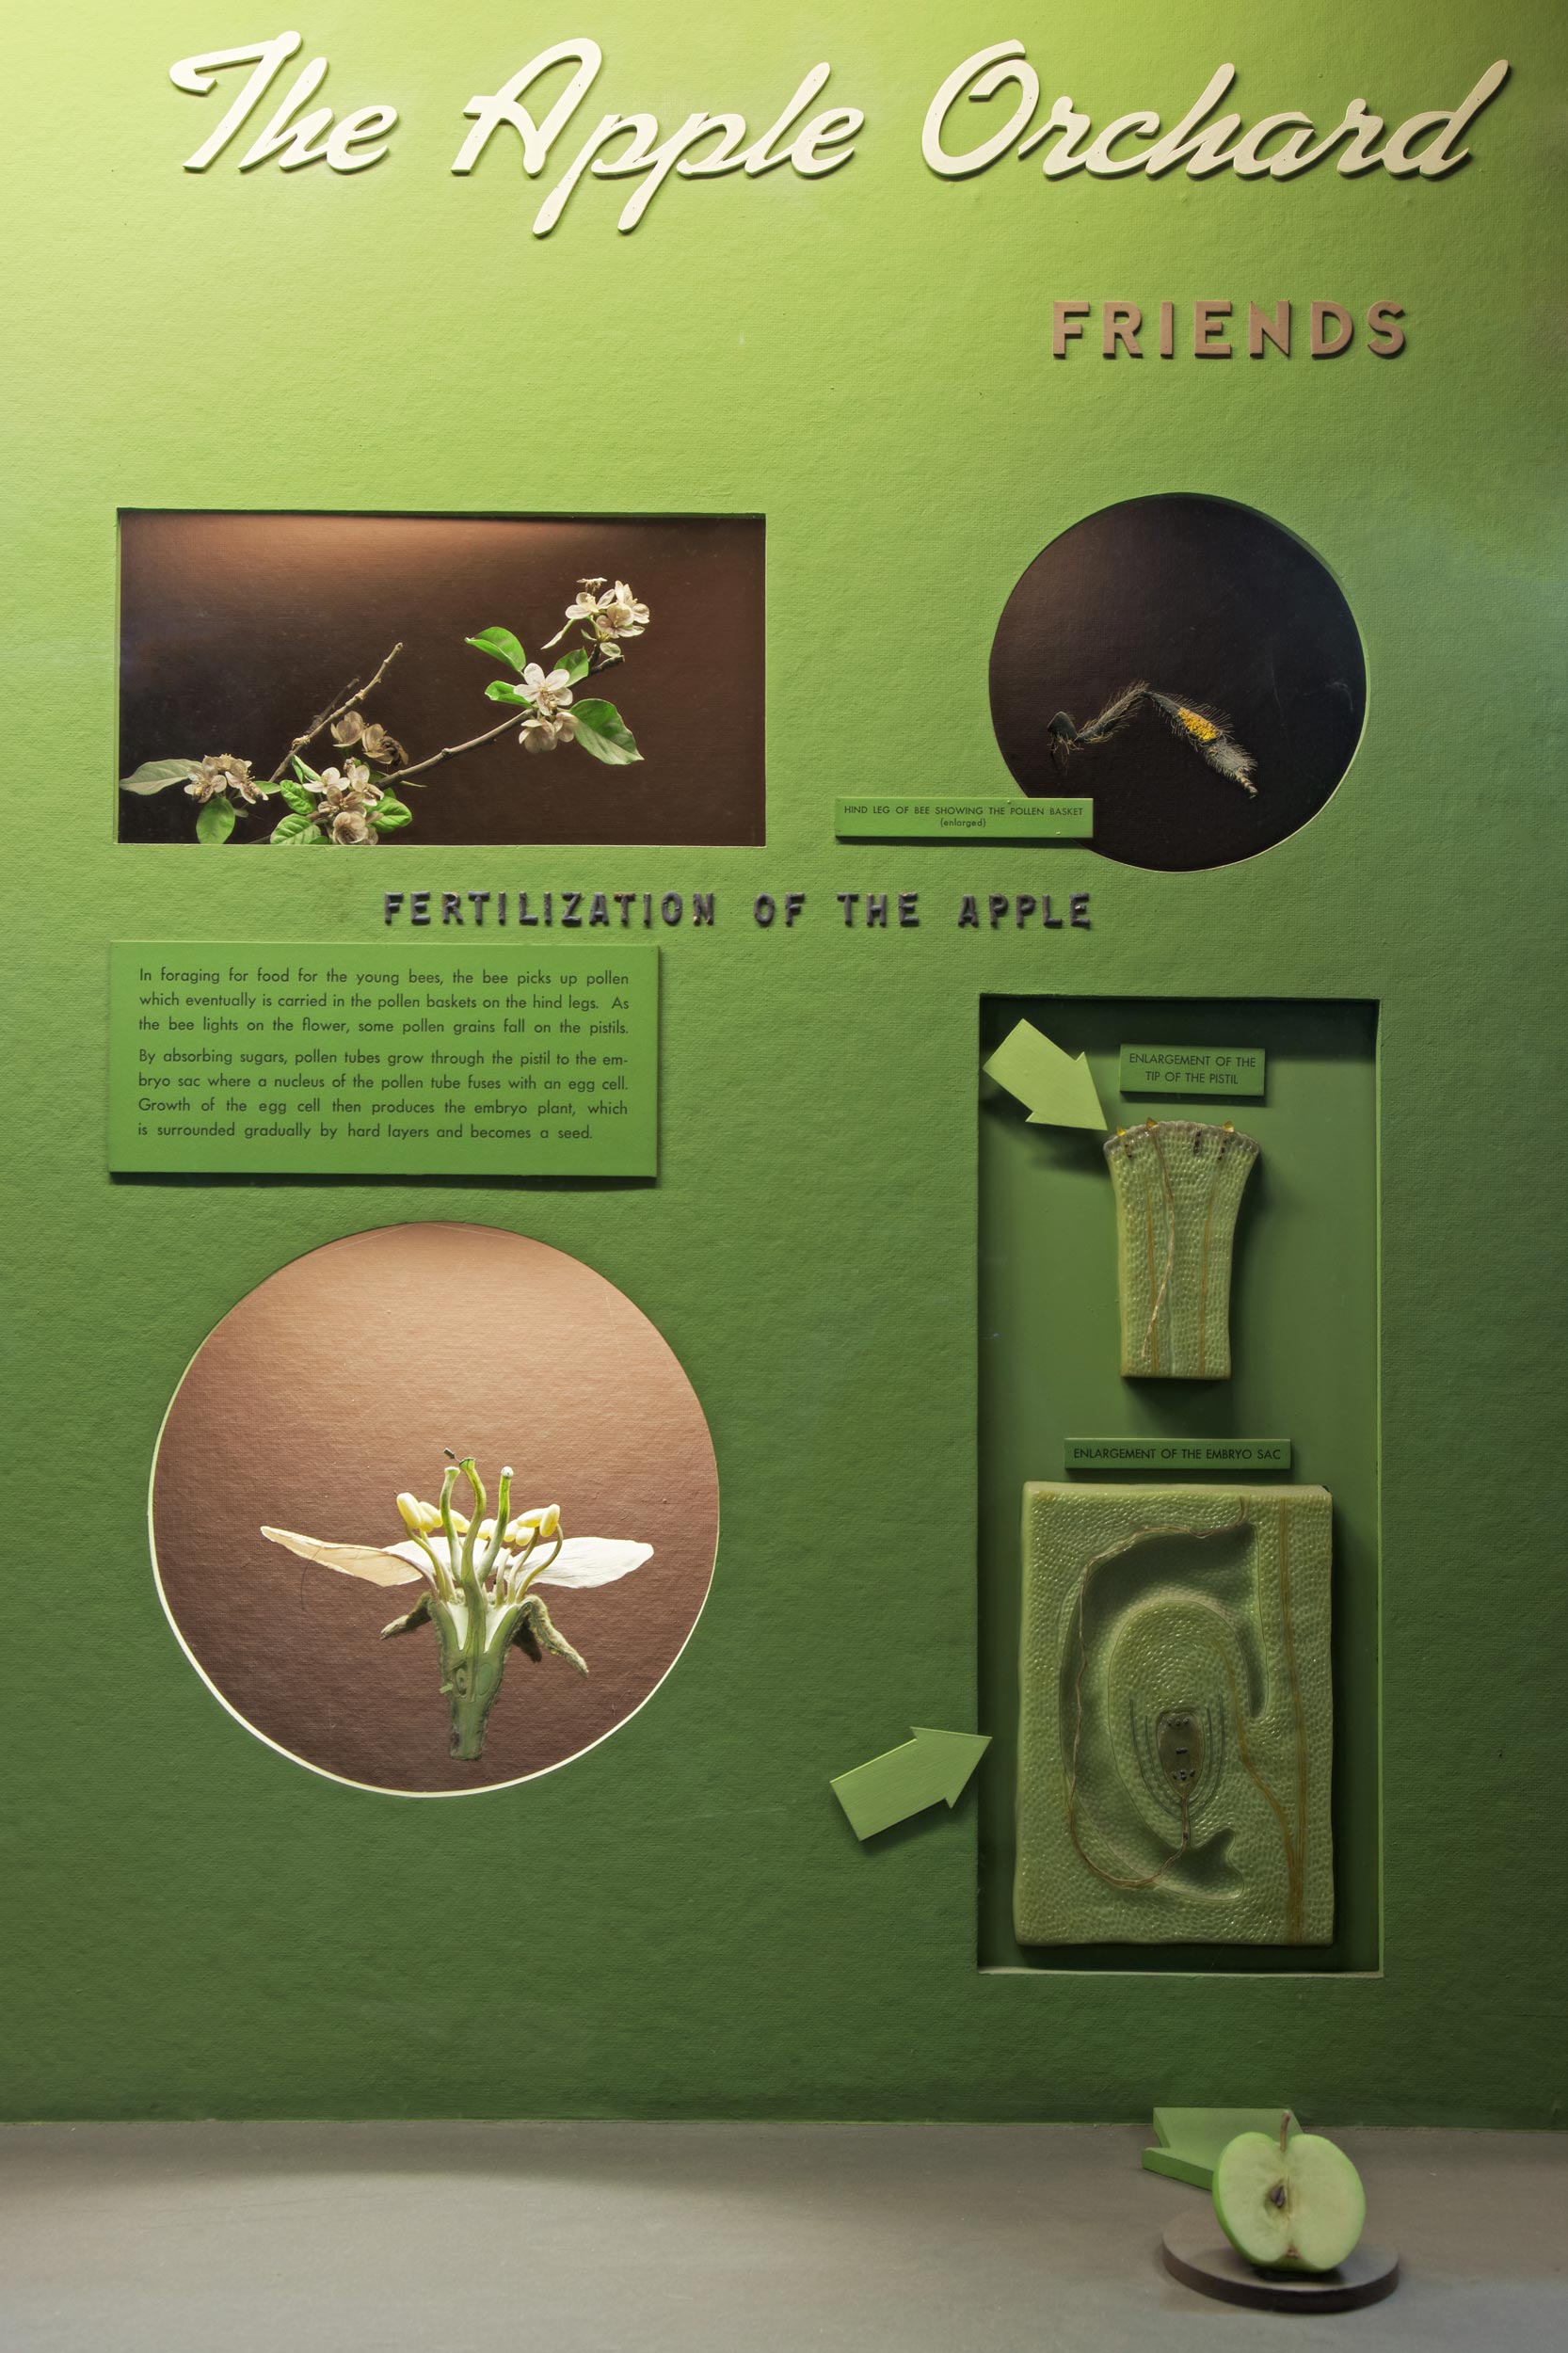 Museum case showing an array of models illustrating the fertilization of the apple